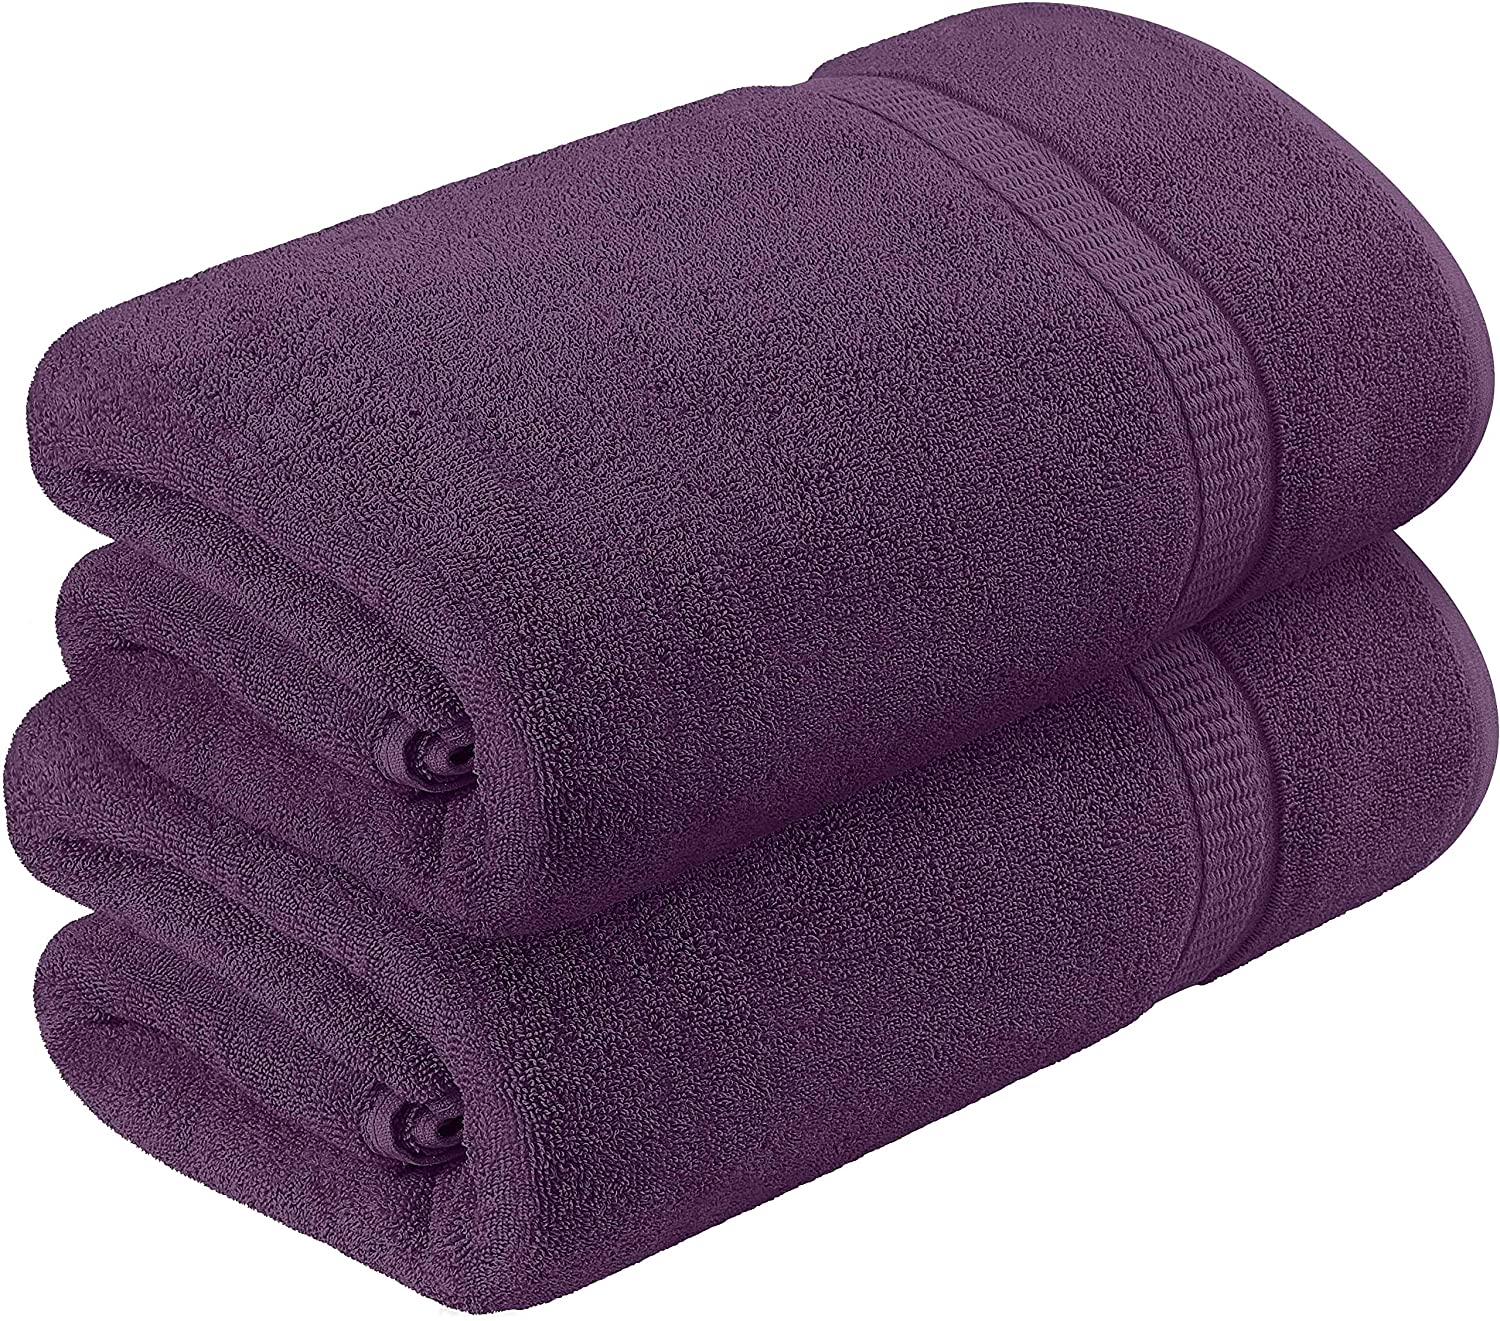 Utopia Towels - Luxurious Jumbo Bath Sheet (35 x 70 Inches, Grey) - 600 GSM  100% Ring Spun Cotton Highly Absorbent and Quick Dry Extra Large Bath Towel  - Super Soft Hotel Quality Towel (2-Pack) 